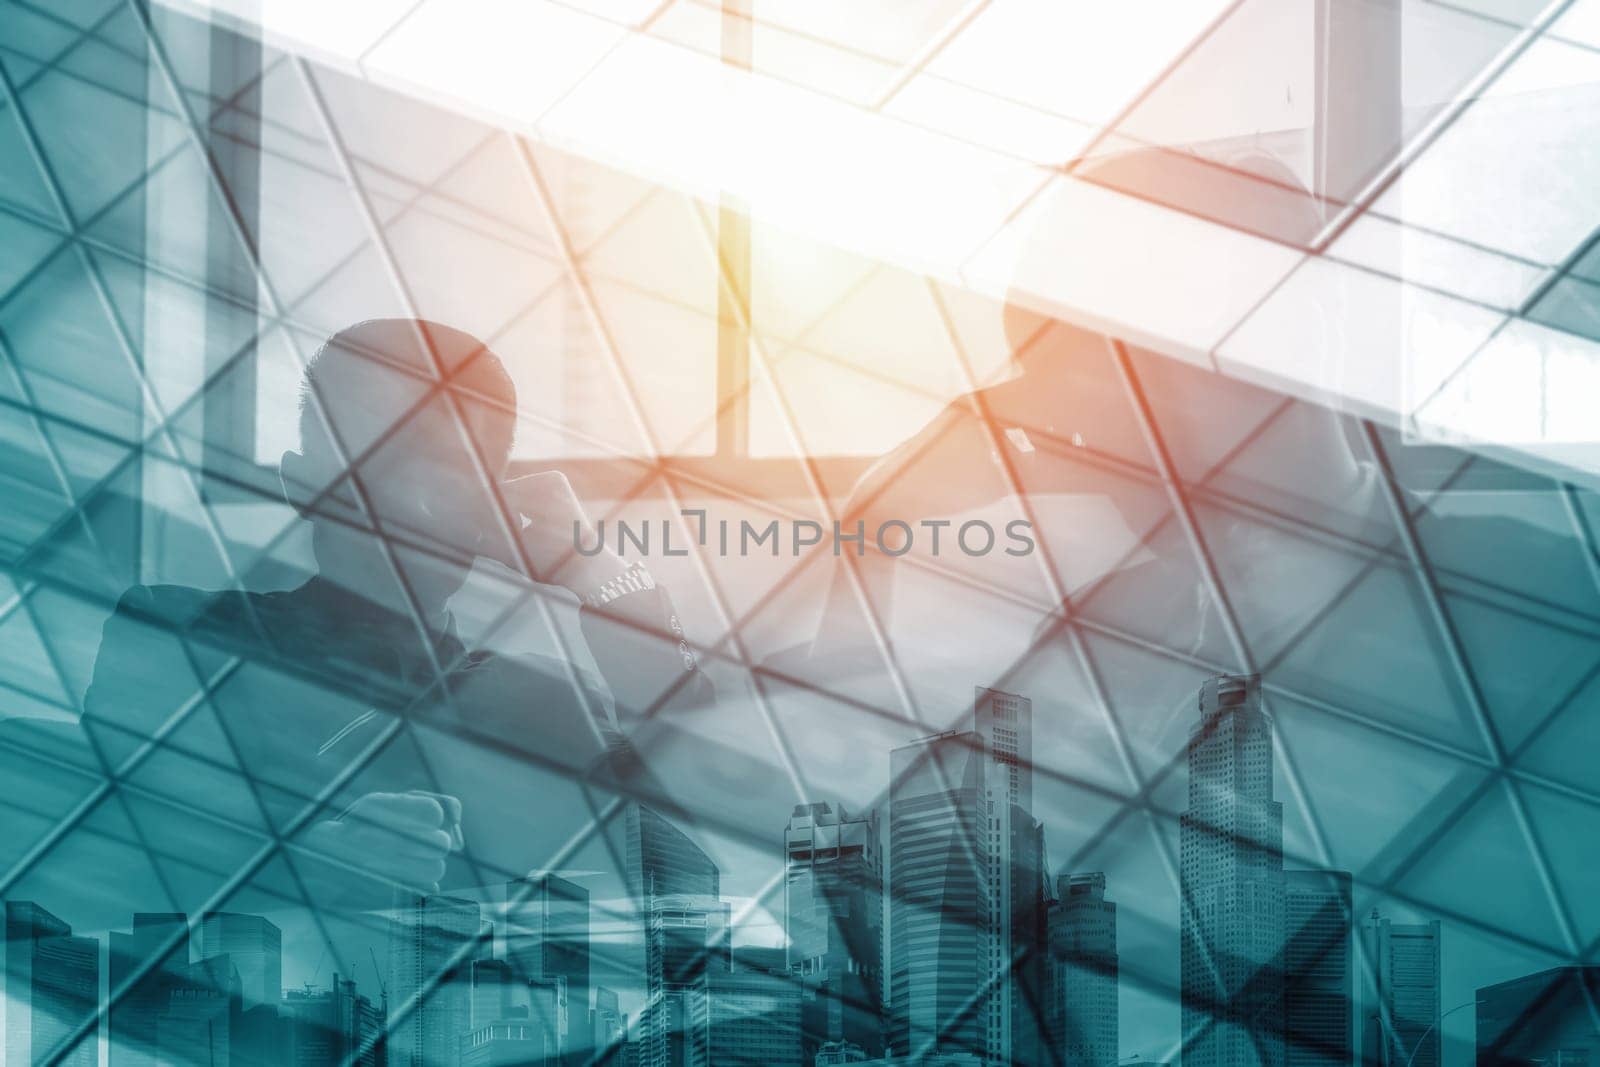 Double Exposure Image of Business People Abstract uds by biancoblue